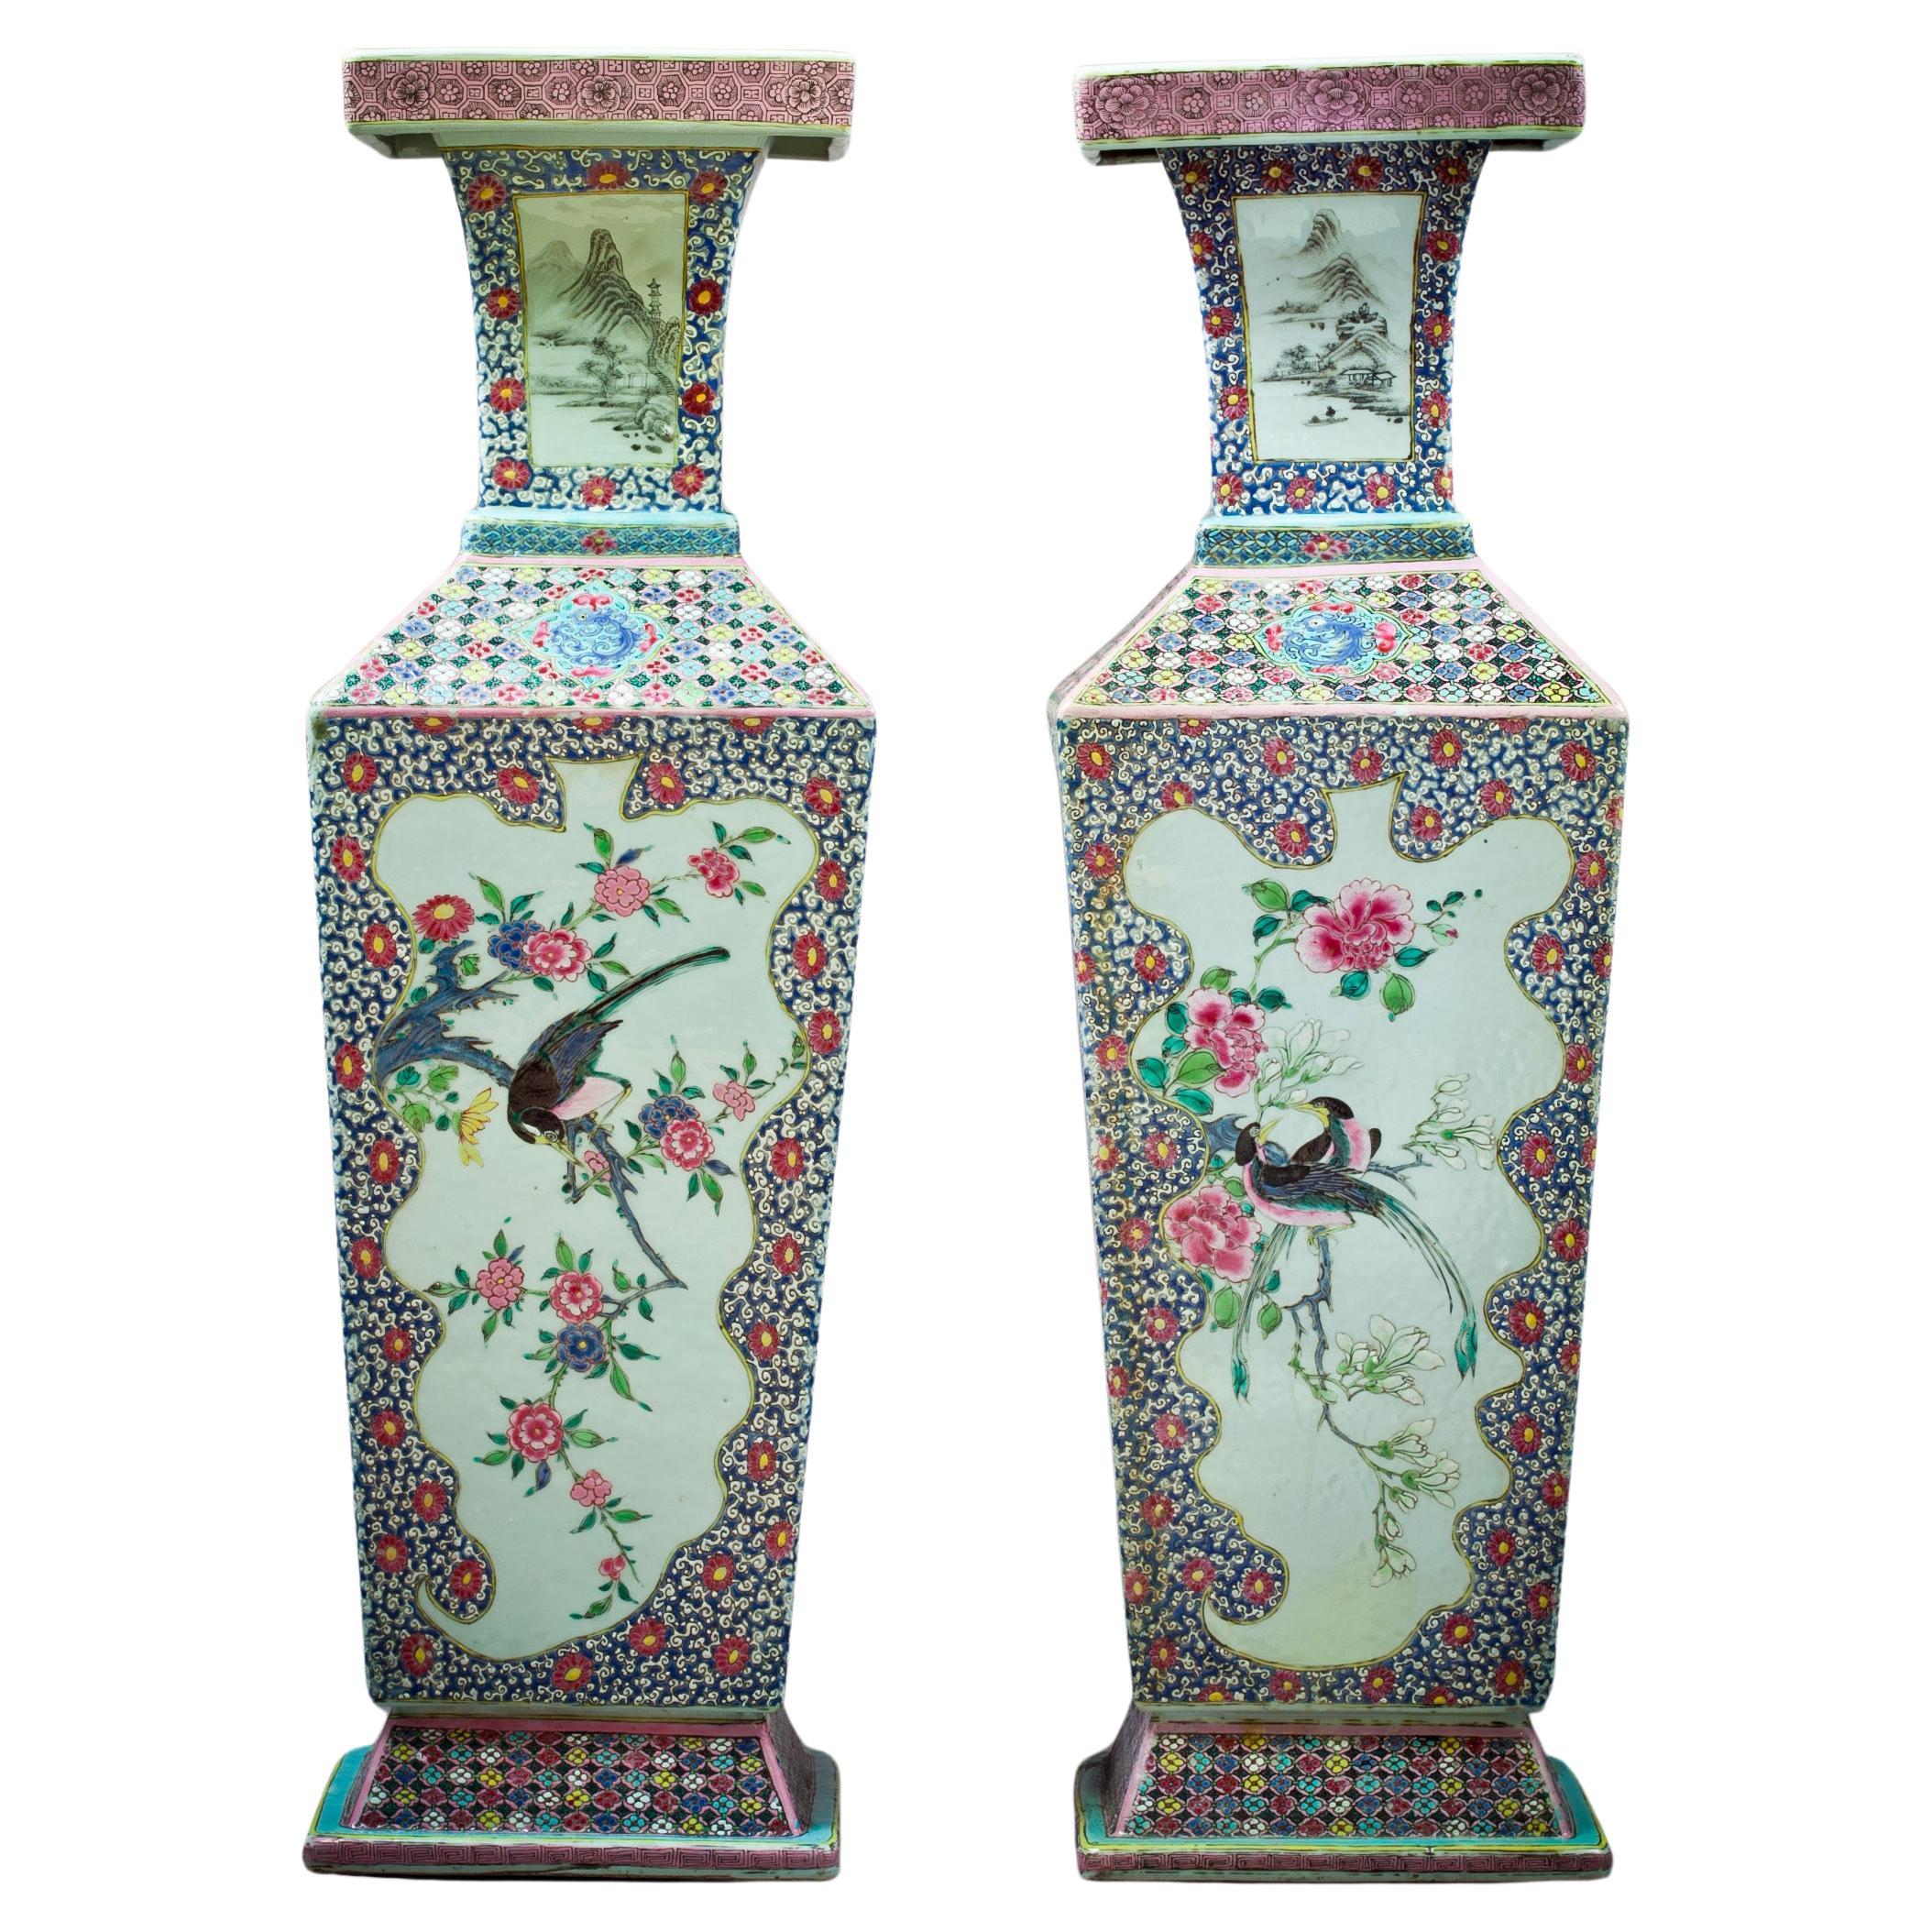 Pair of Large Chinese Famille Rose Vases, circa 1770